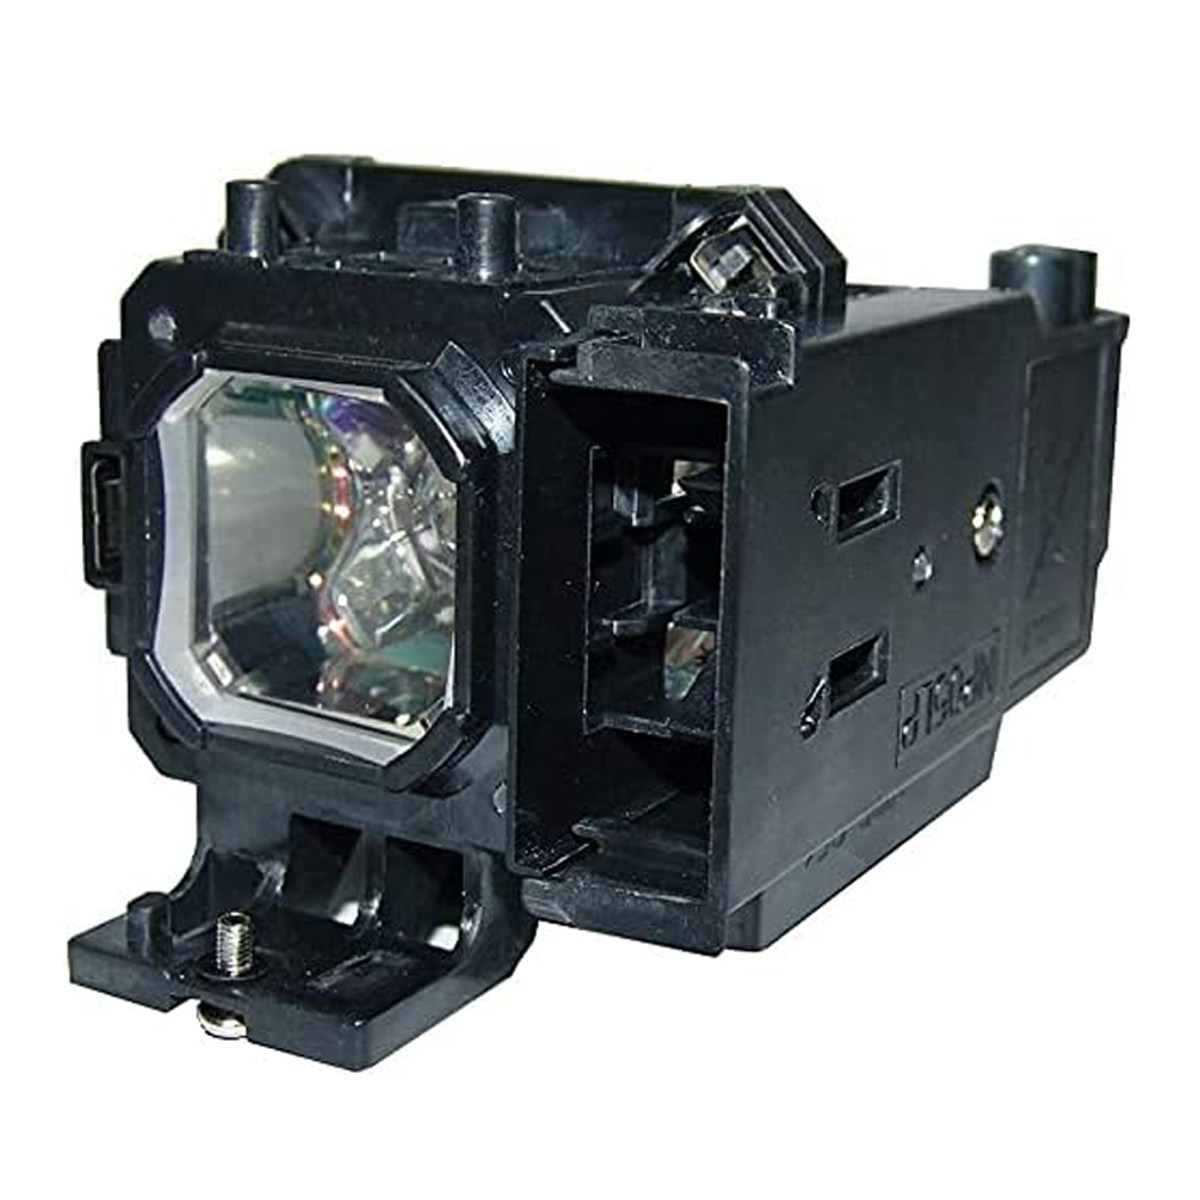 Replacement Projector lamp LV-LP30/2481B001AA For CANON LV-7365